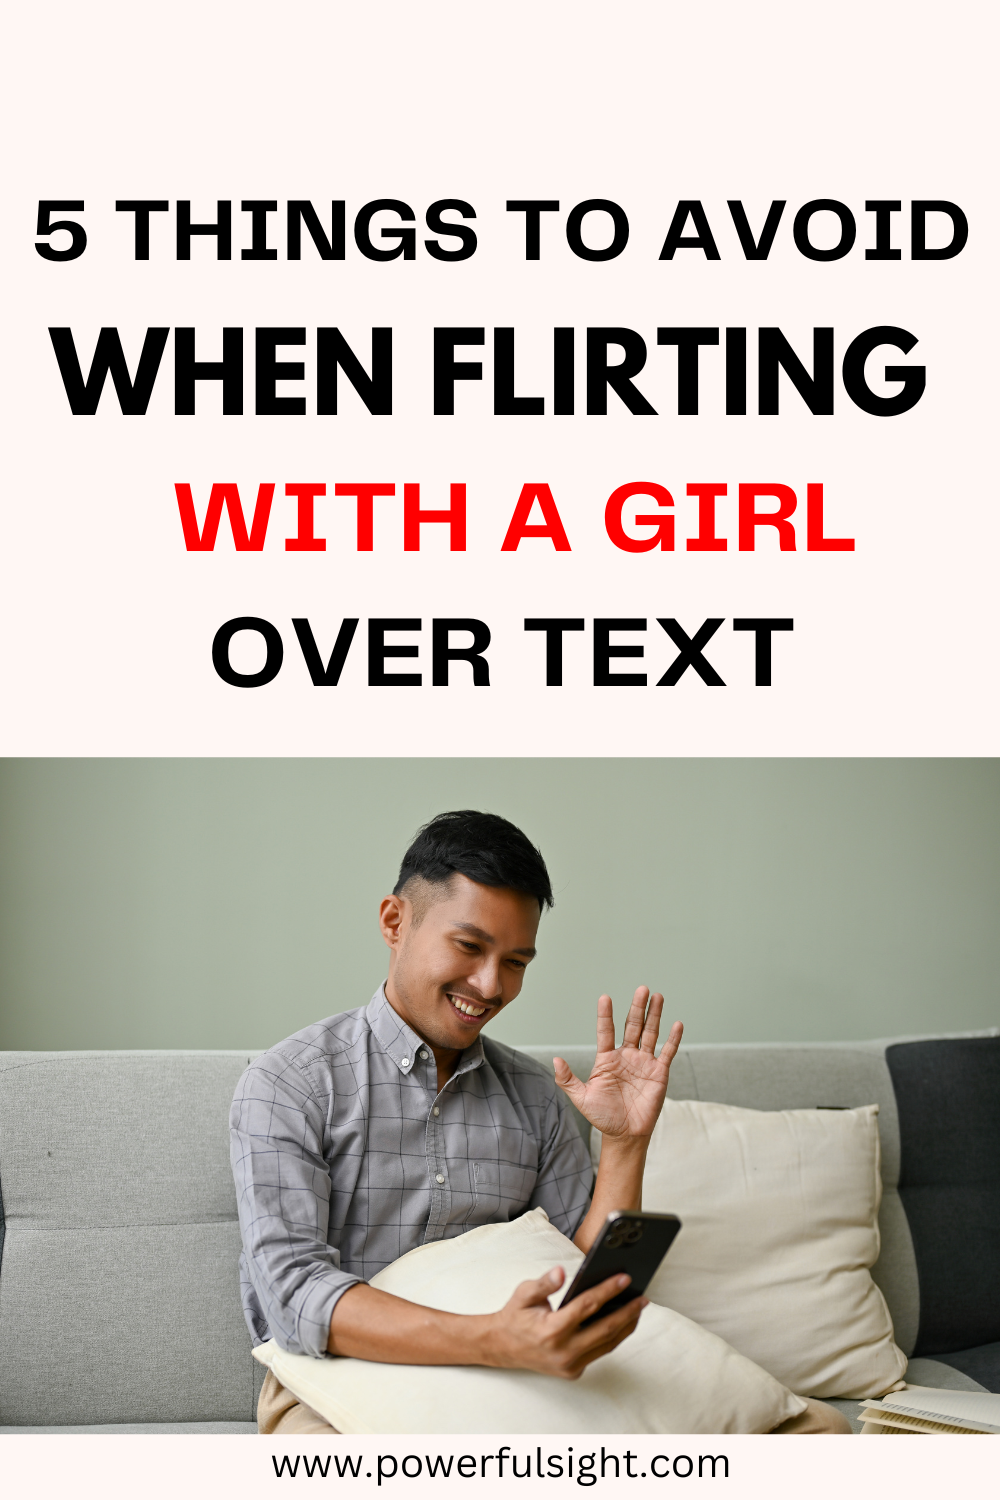 5 Effective Ways To Flirt With A Girl Over Text Powerful Sight 3511